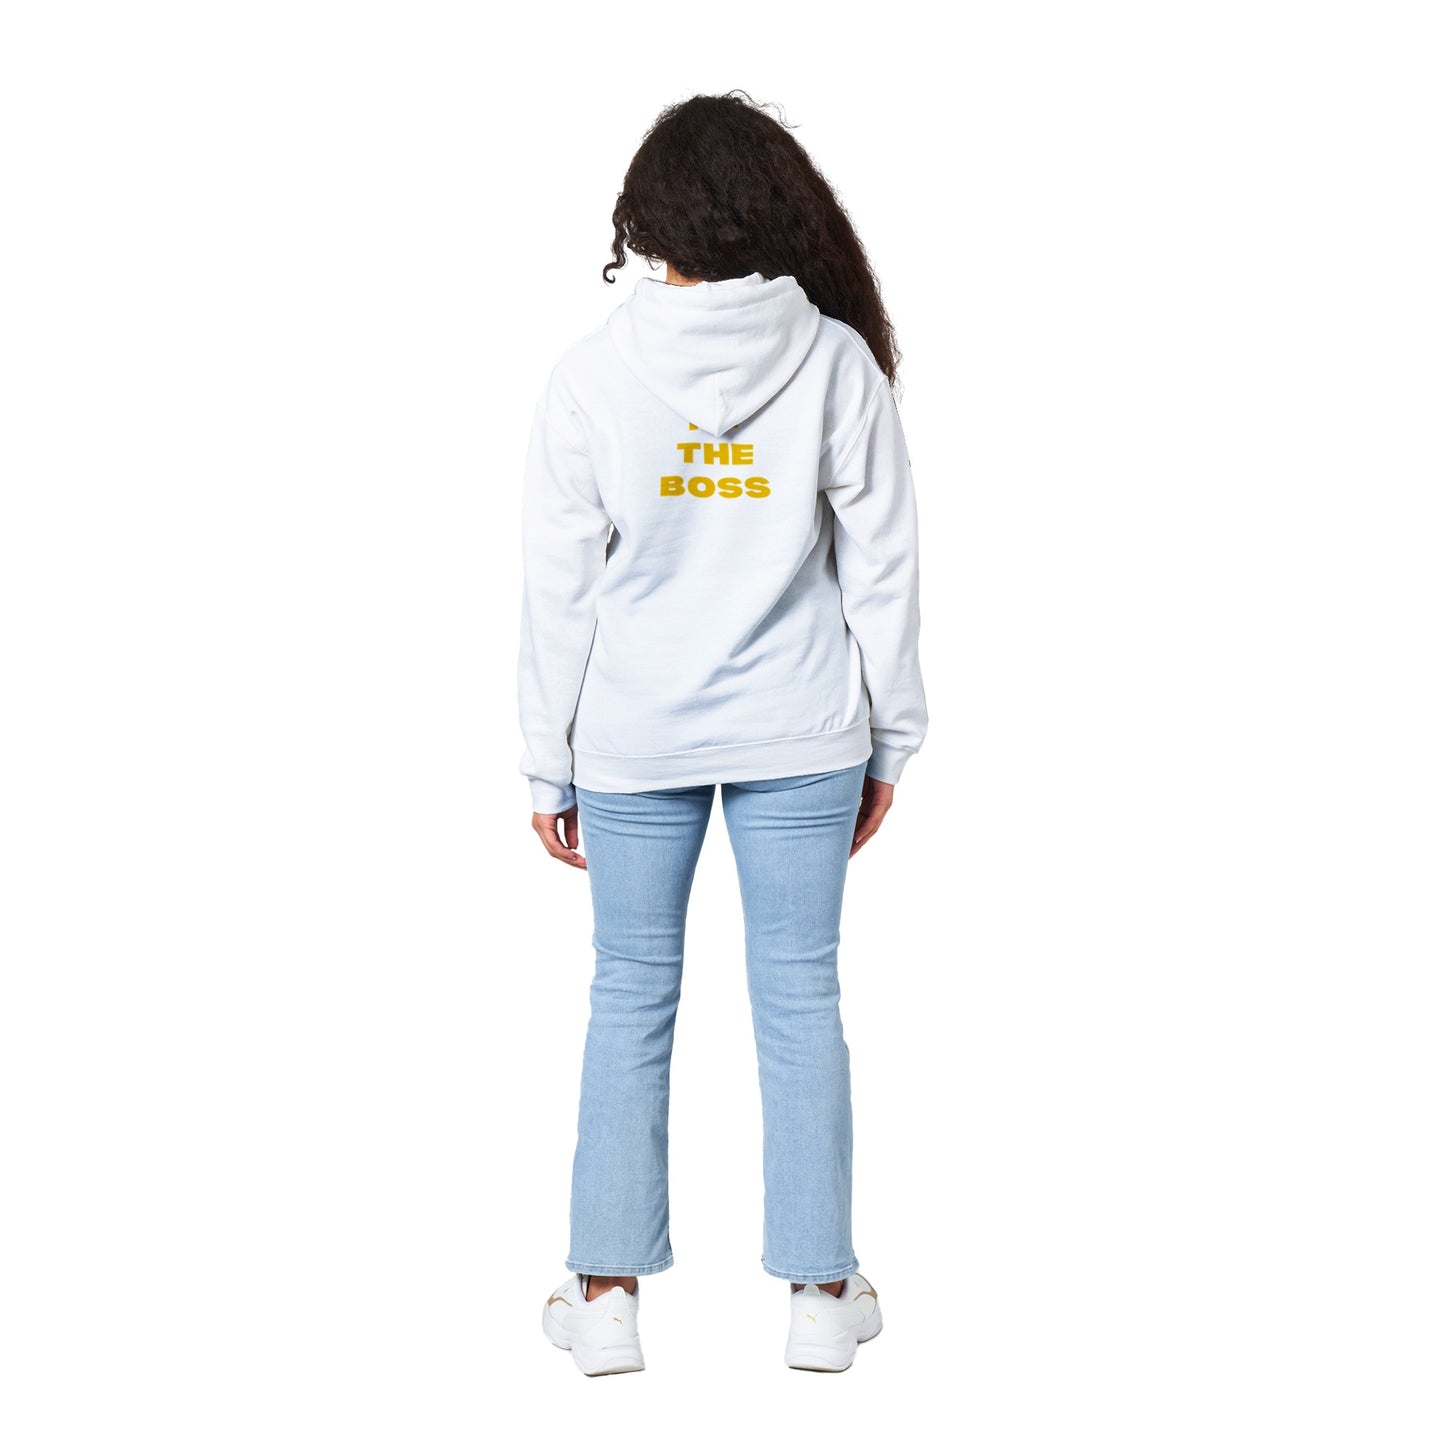 I'm The Boss Classic Unisex Pullover Hoodie